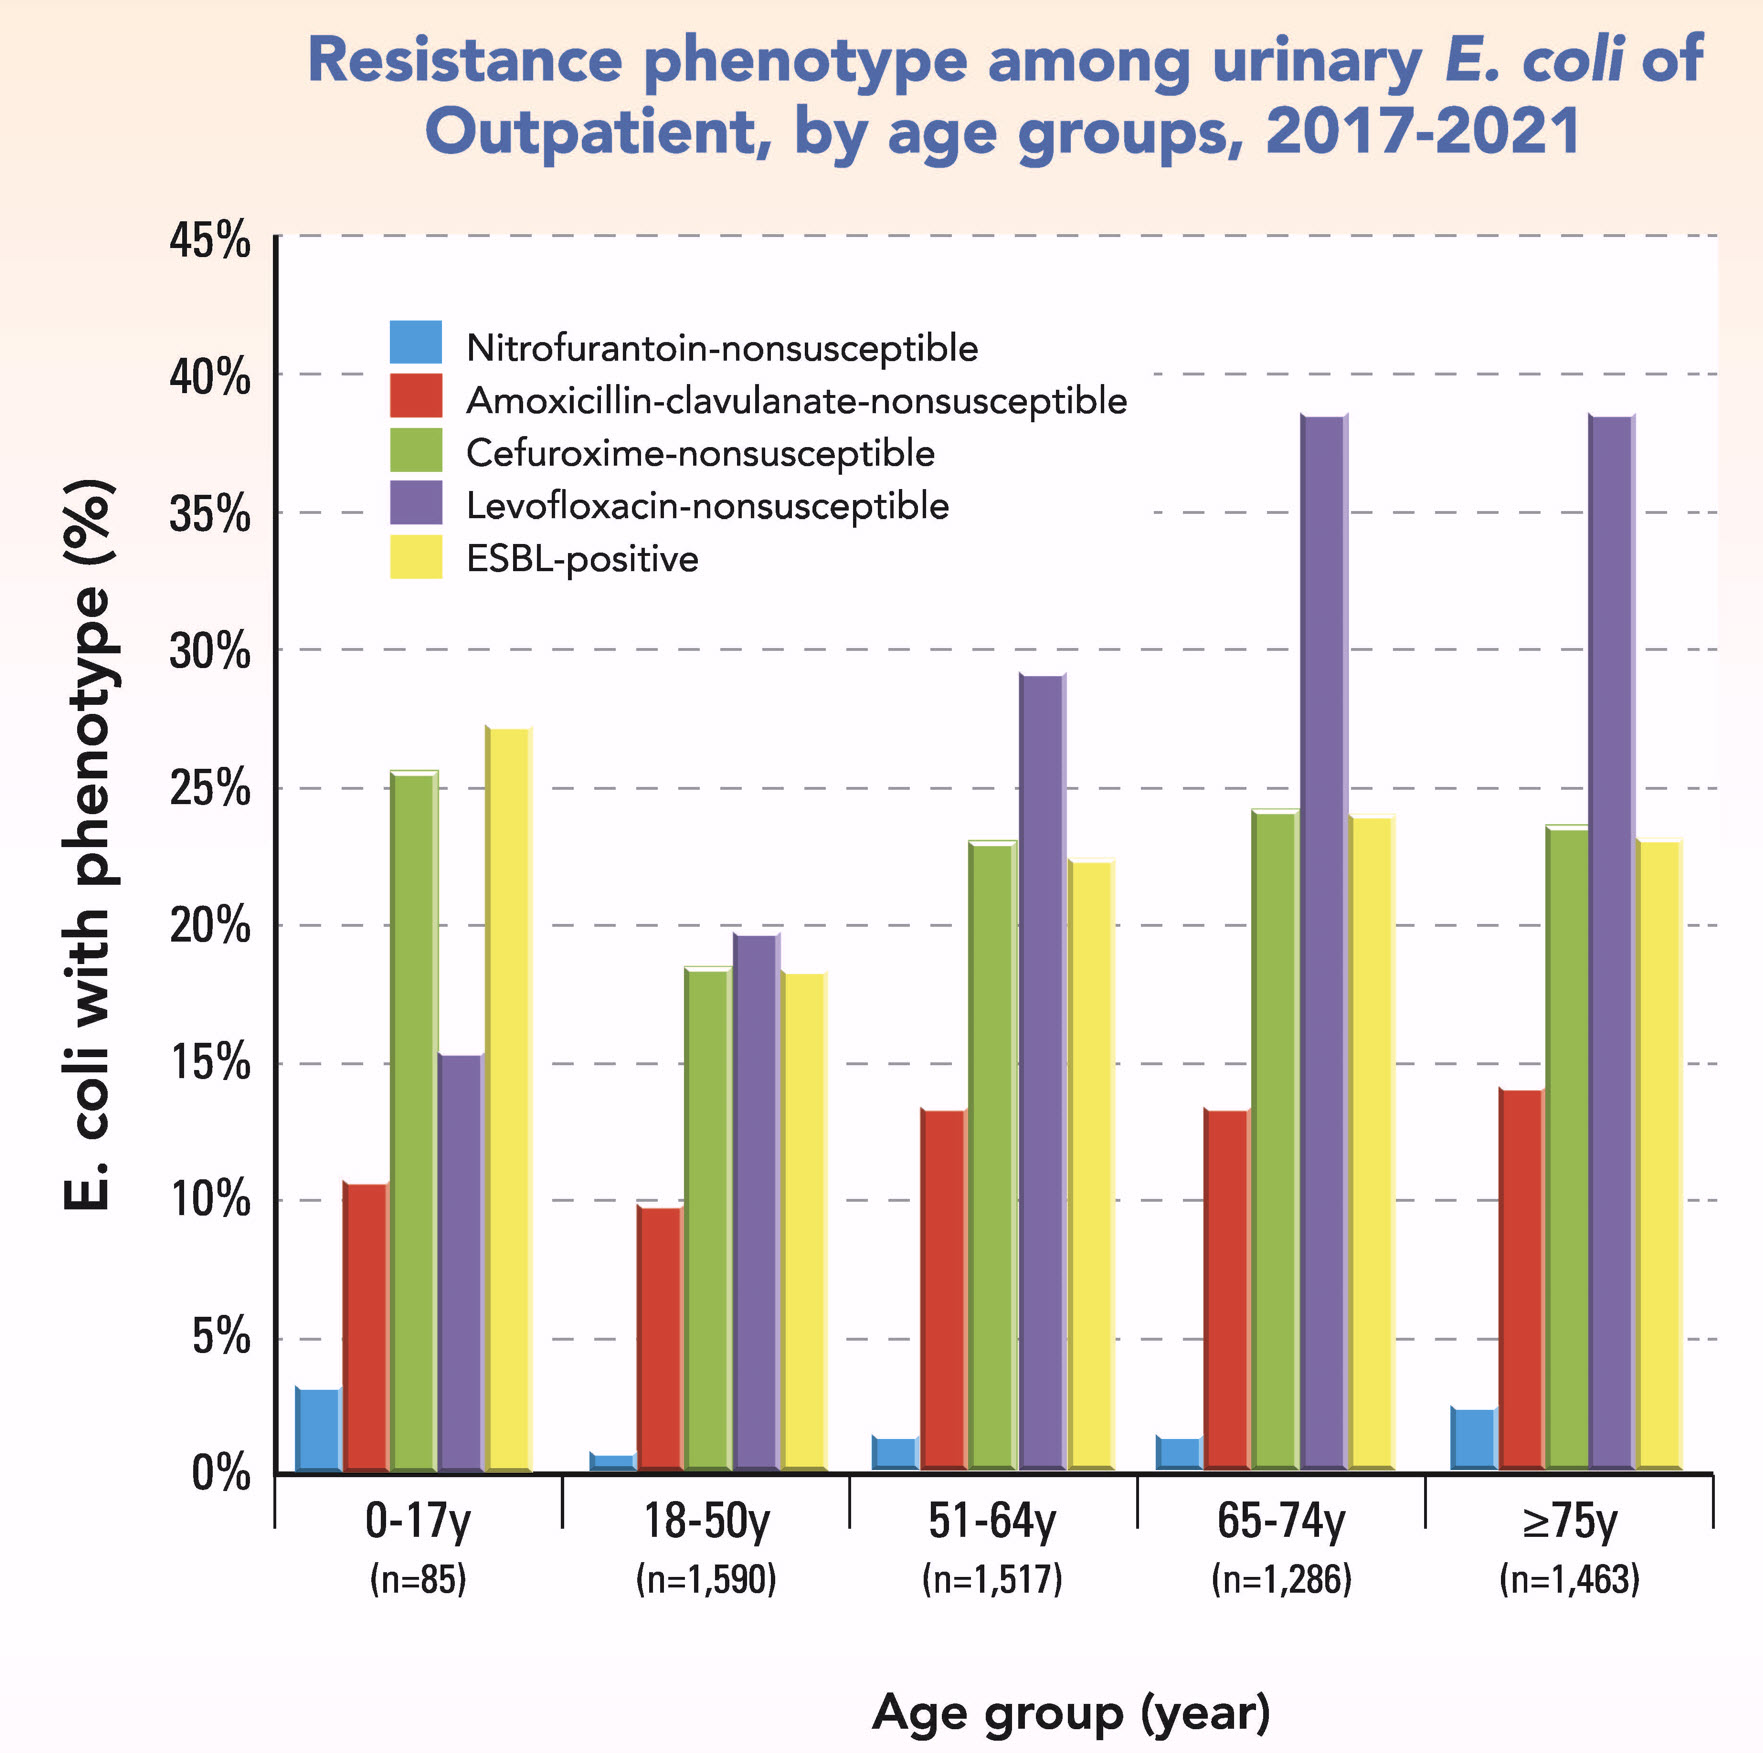 Figure HKW-1. Resistance phenotypes among urinary E. coli from outpatients by age groups, 2017-2021